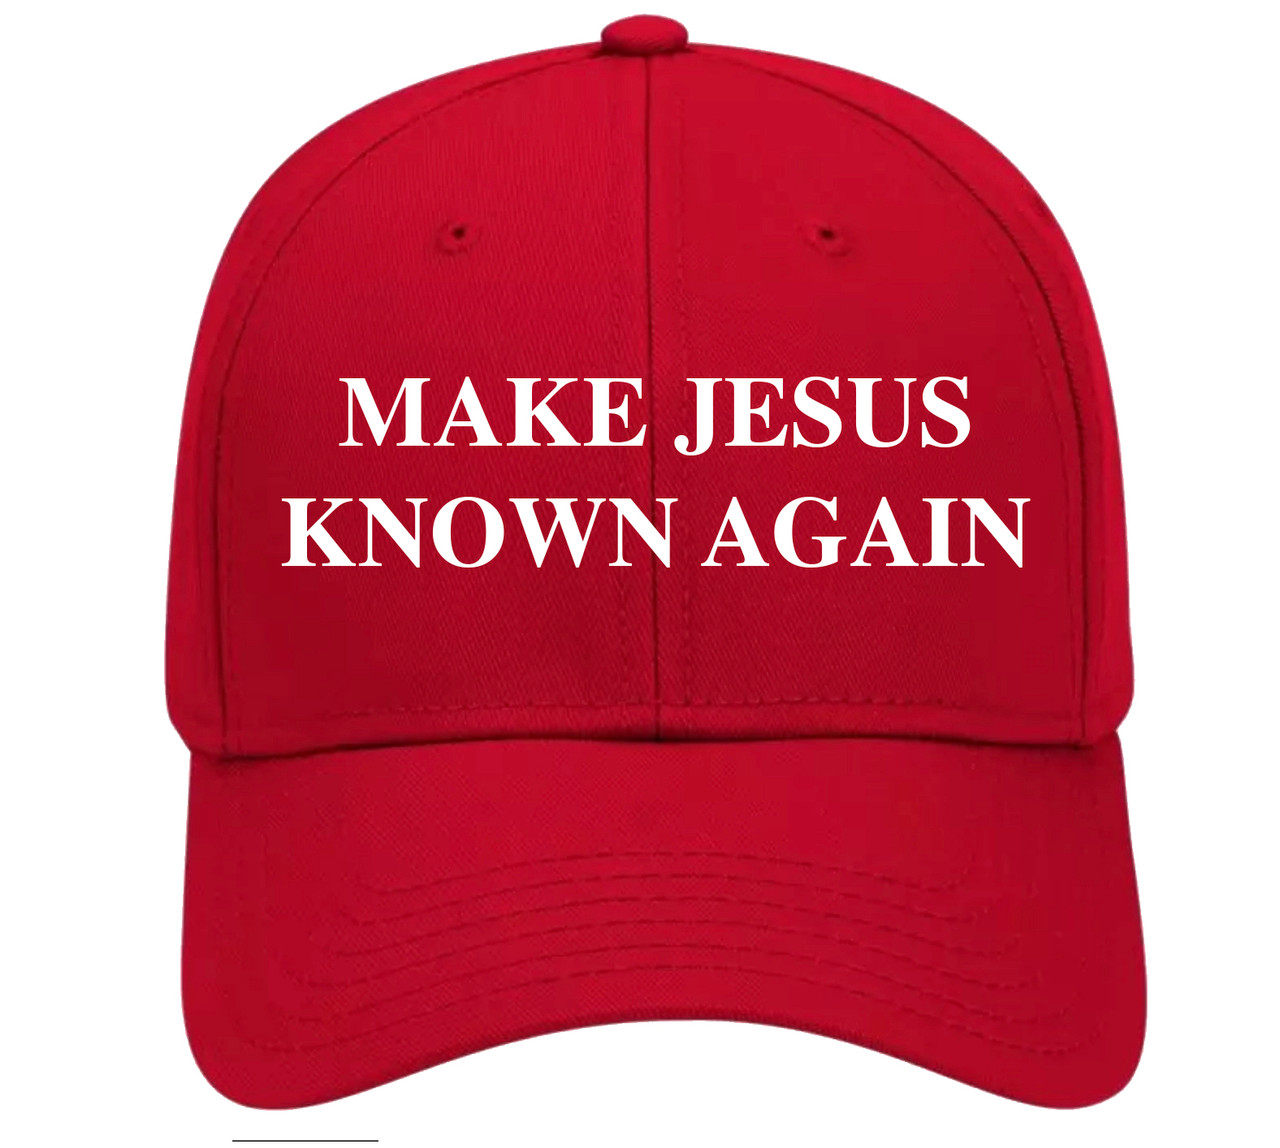 Trenz Shirt Company Christian Embroidered Make Jesus Known Again Hat Trenz Shirt Company